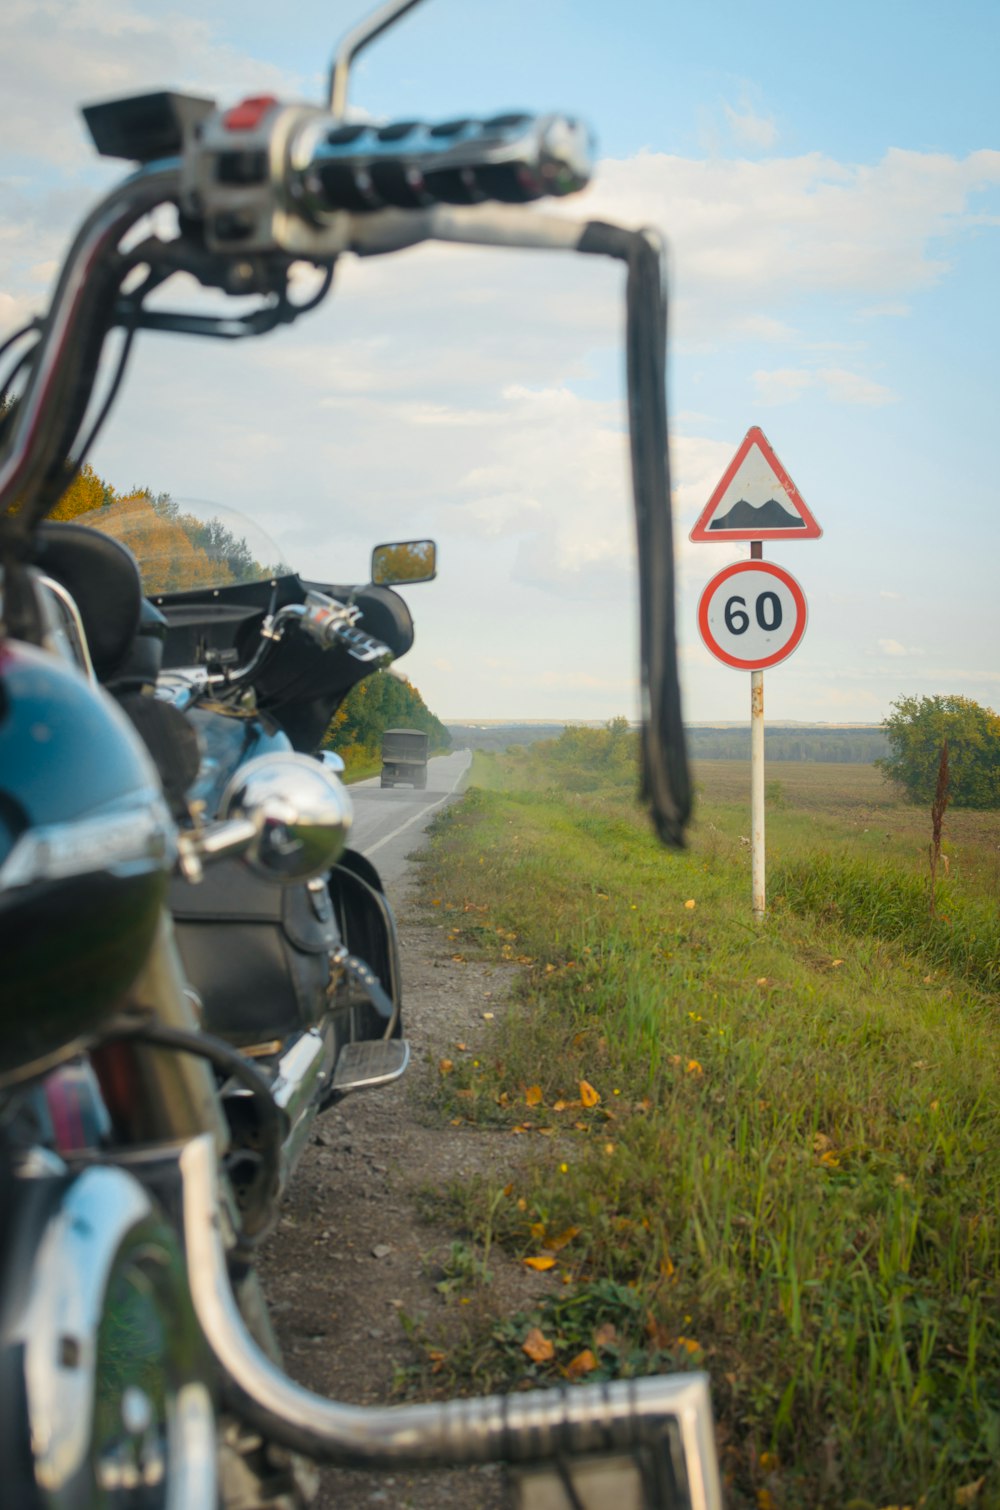 a motorcycle parked next to a speed limit sign